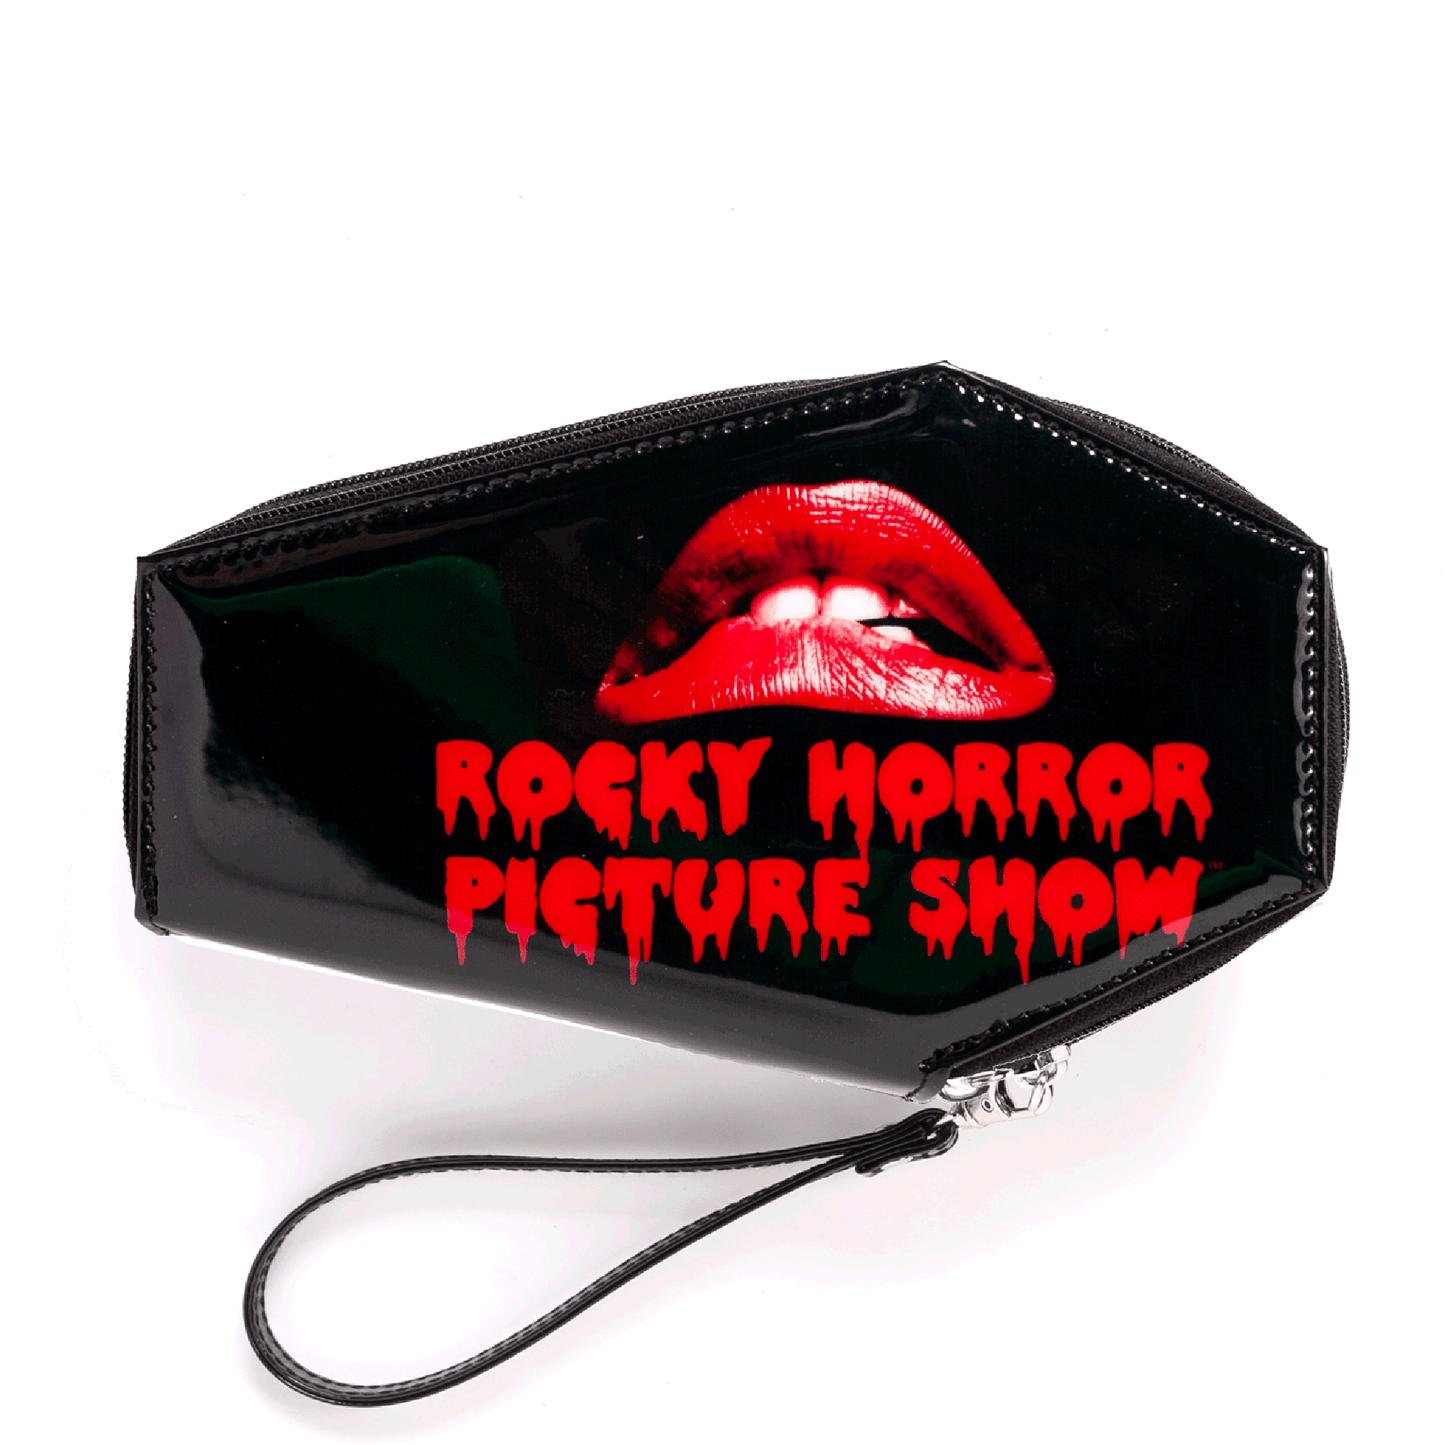 Rocky Horror Picture Show Coffin Wallet